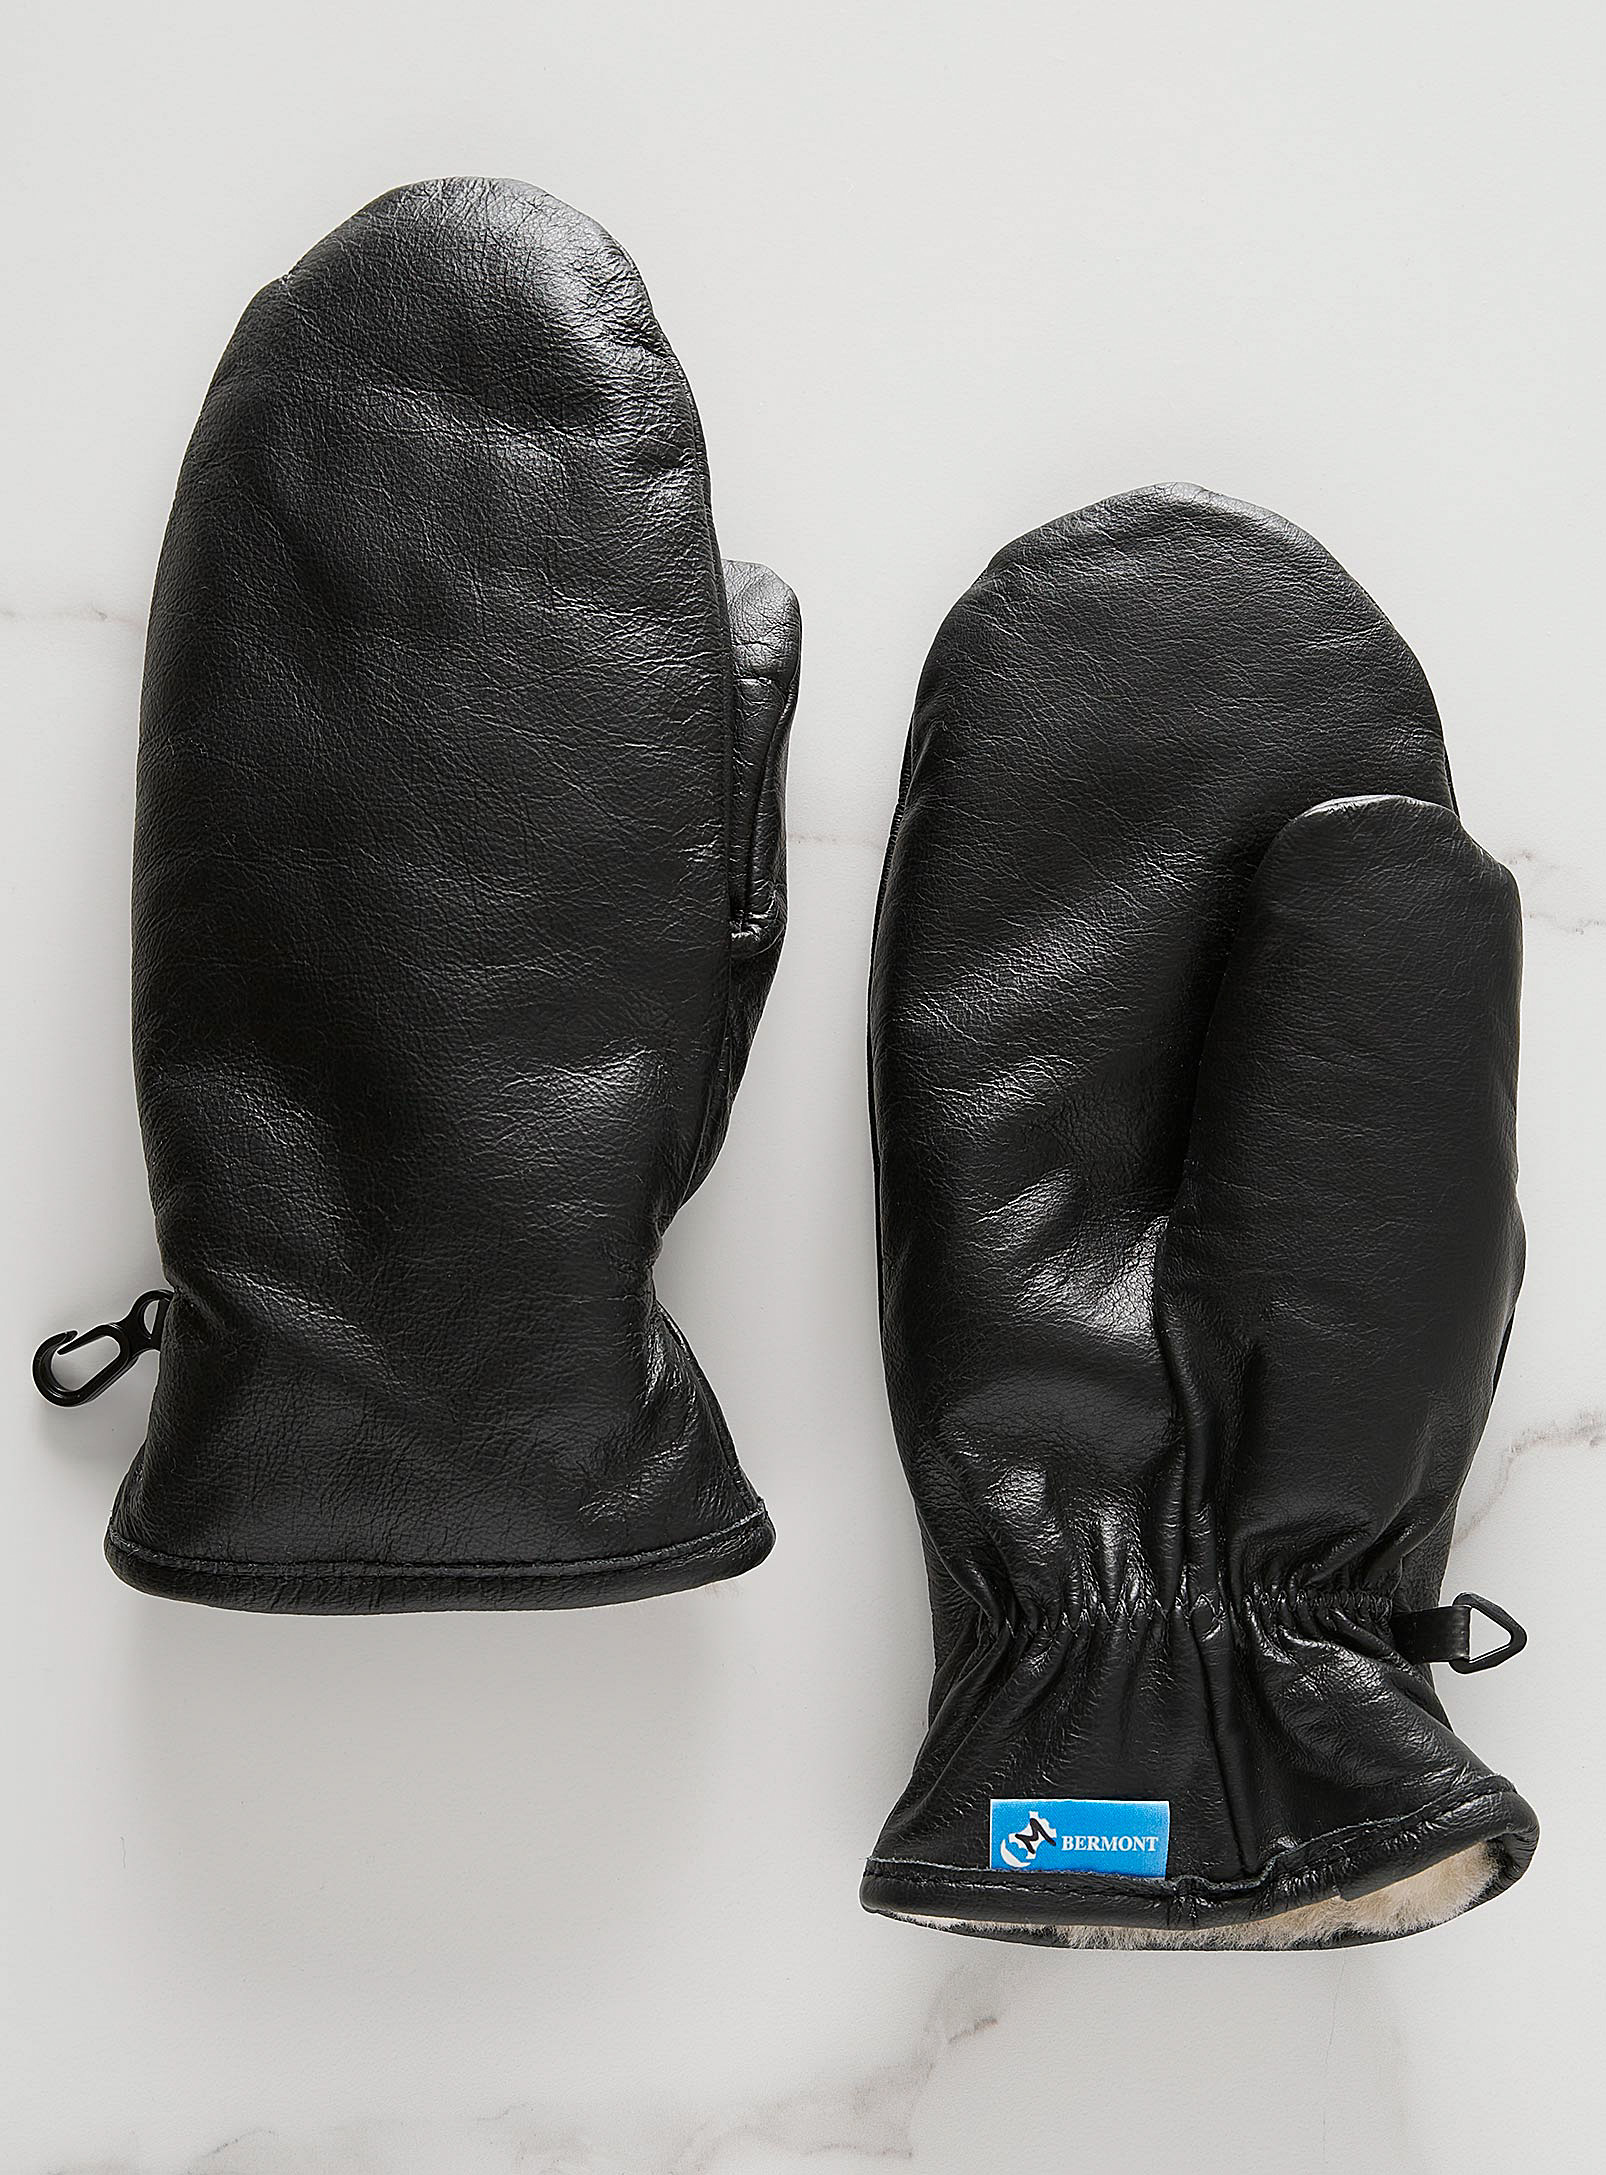 Les cuirs Bermont Inc. - Shearling-lined leather mittens